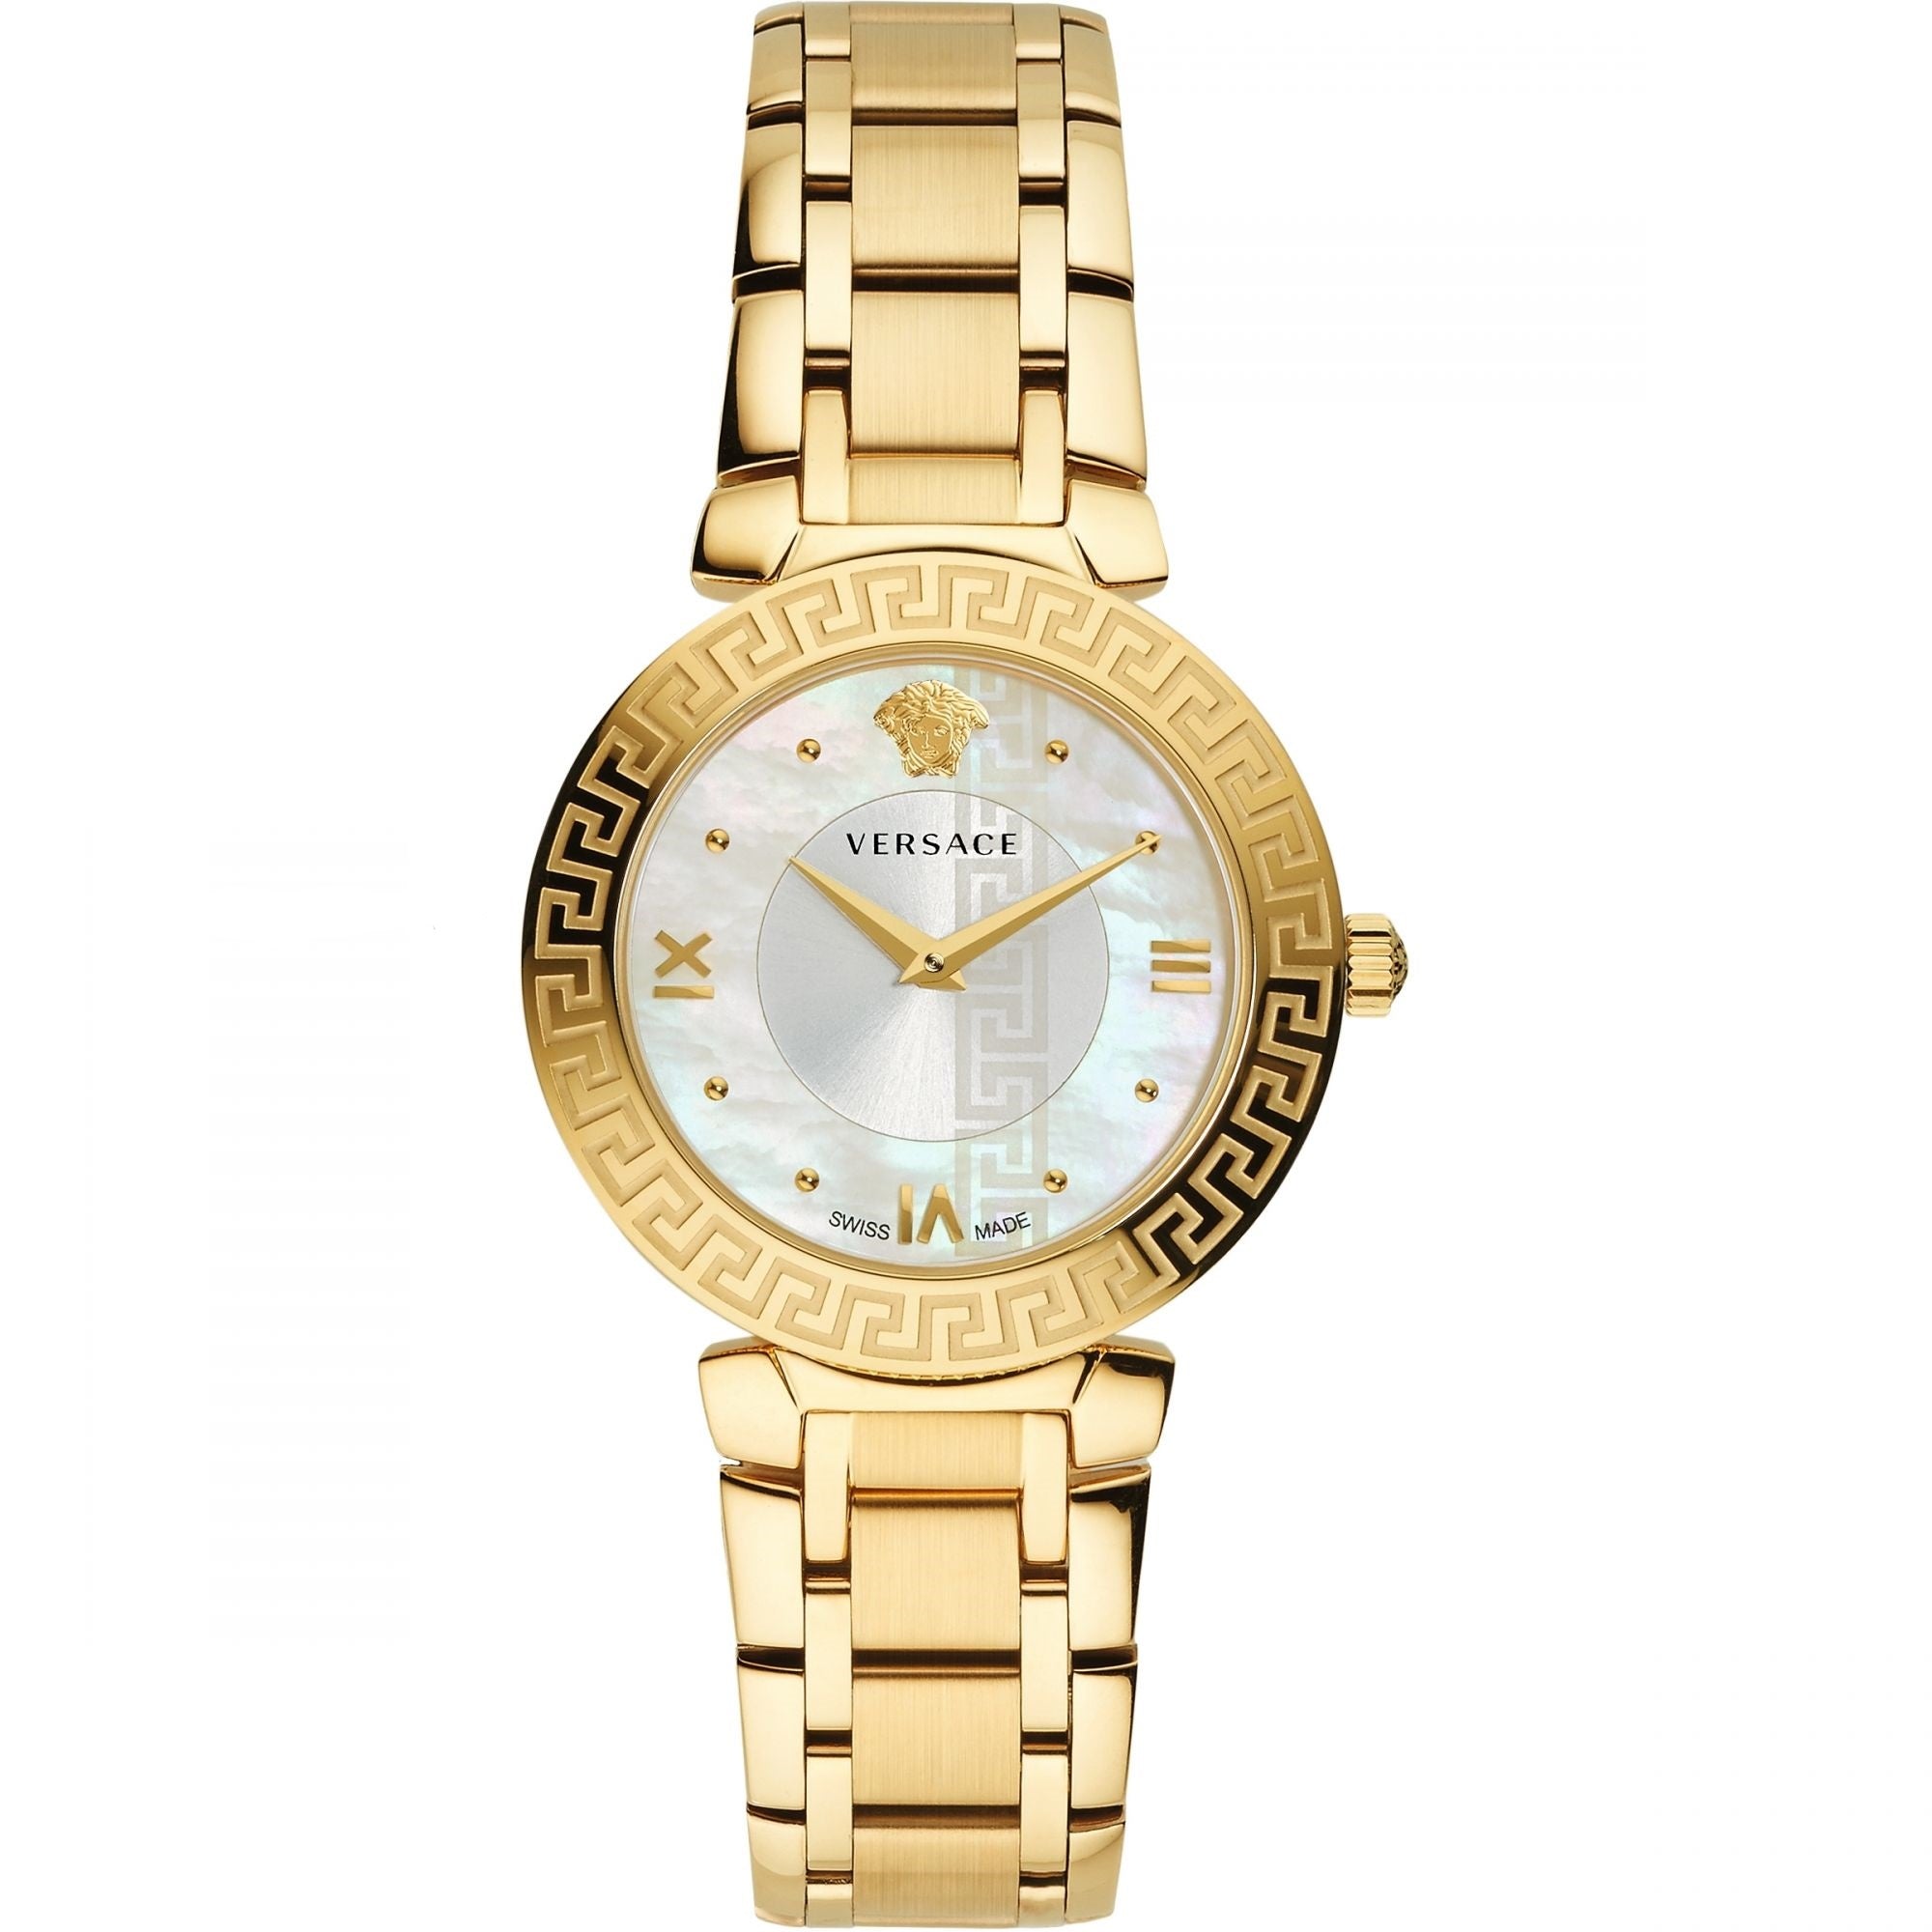 Daphnis Versace Yellow Gold Watch w/ Mother of Pearl Face